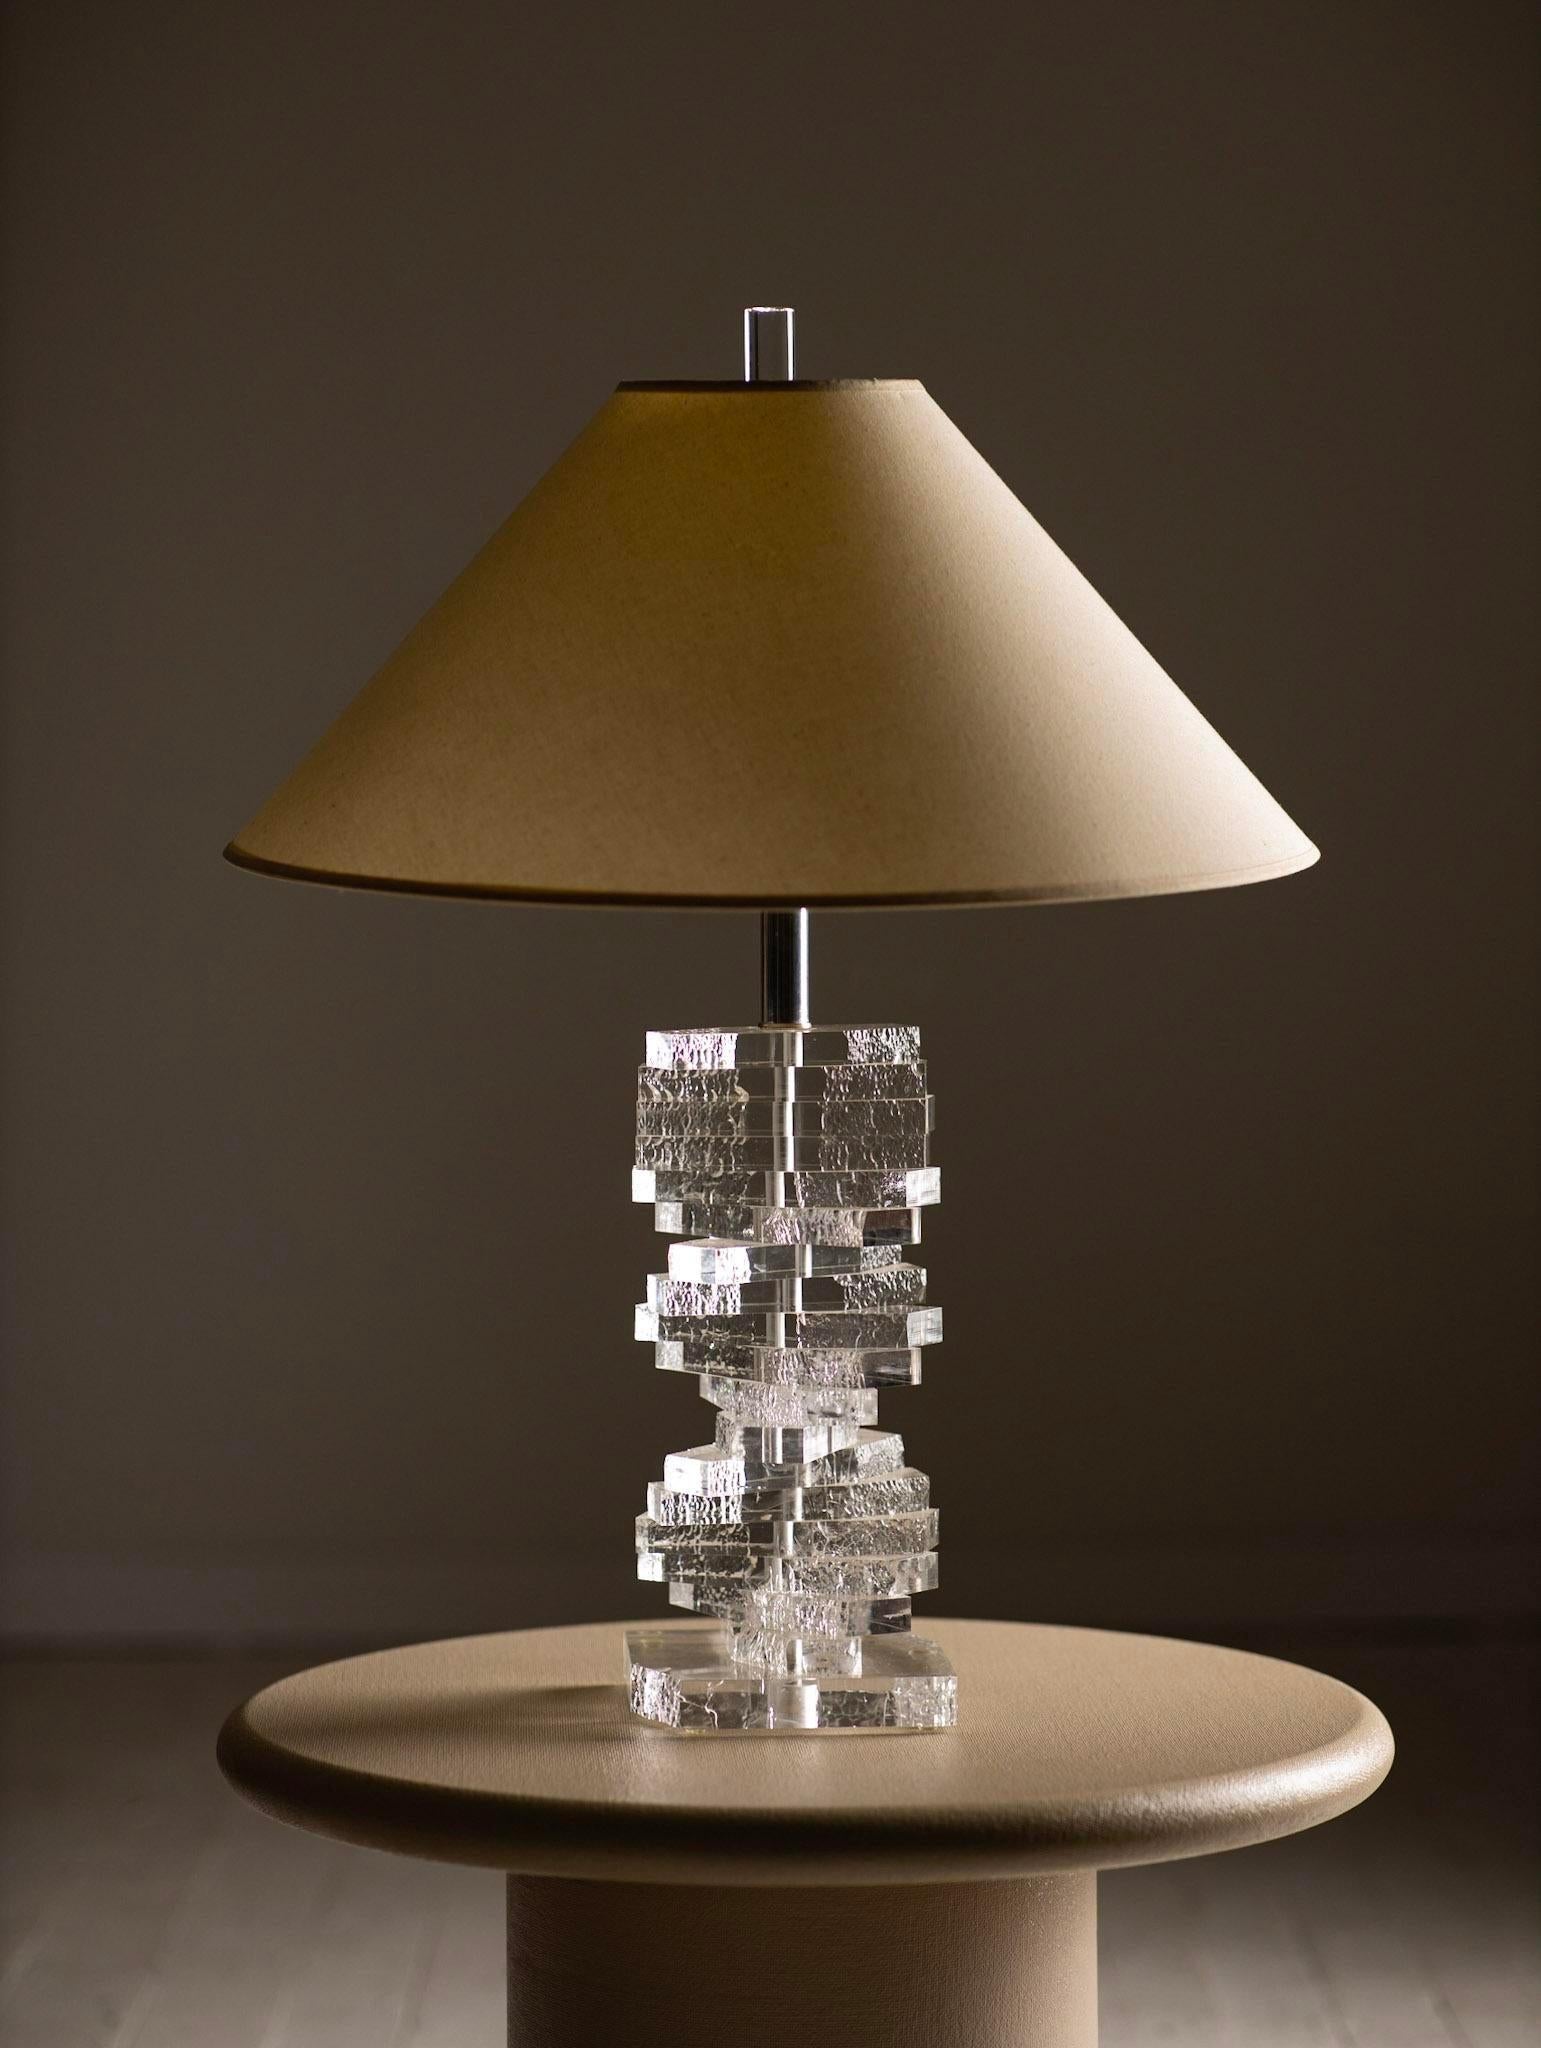 A staple in the Hollywood Regency style, this cascading lucite lamp will add a touch of metropolitan glamour to any space. Textured edges give this piece a unique quality like that of melting ice. Shade not included. Height of sculptural base